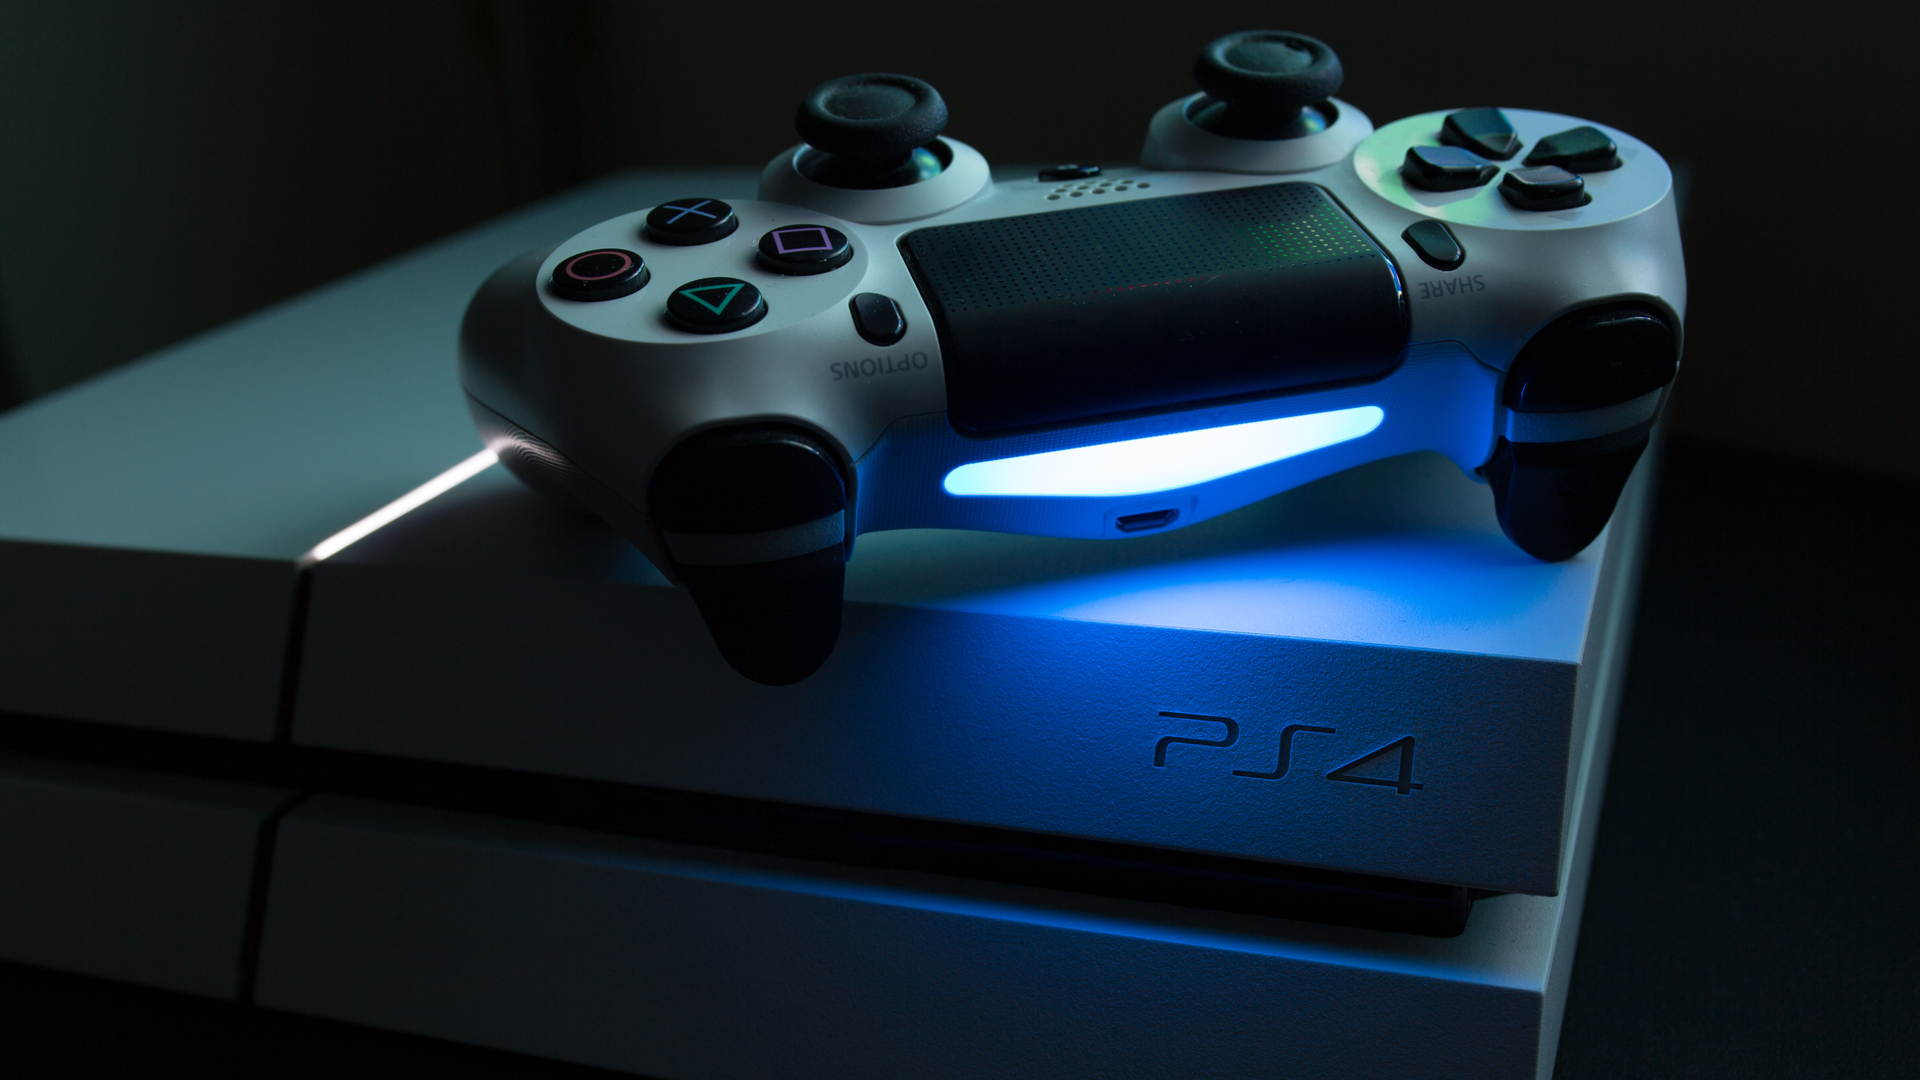 best PS4 games: PS4 console with controller in dim lighting